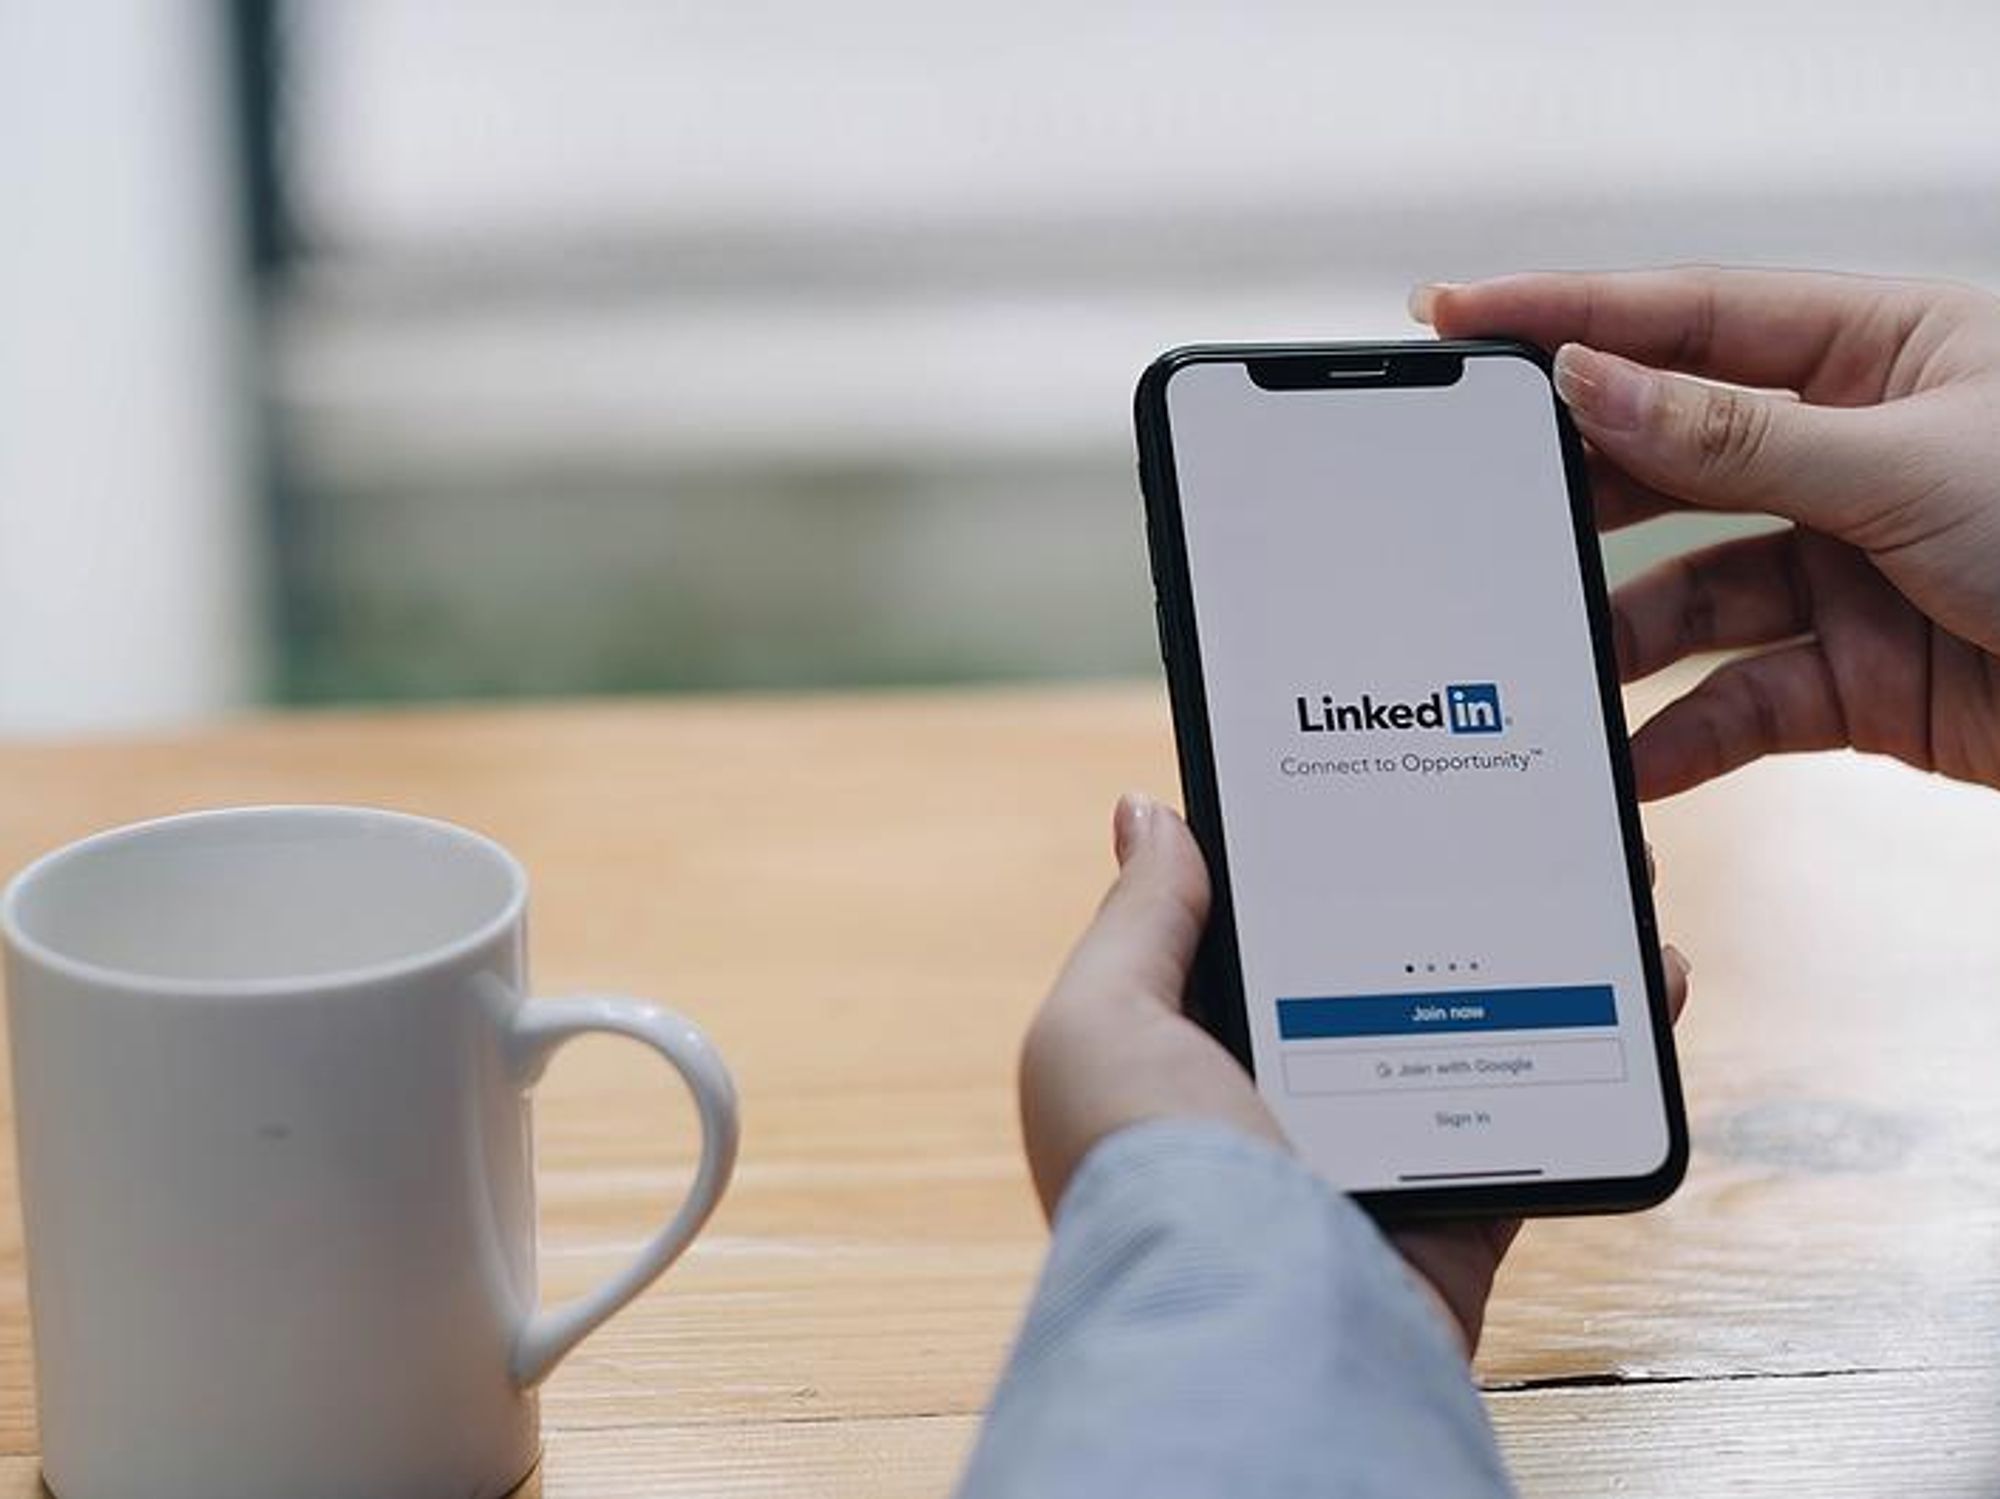 Woman looks at LinkedIn on her phone